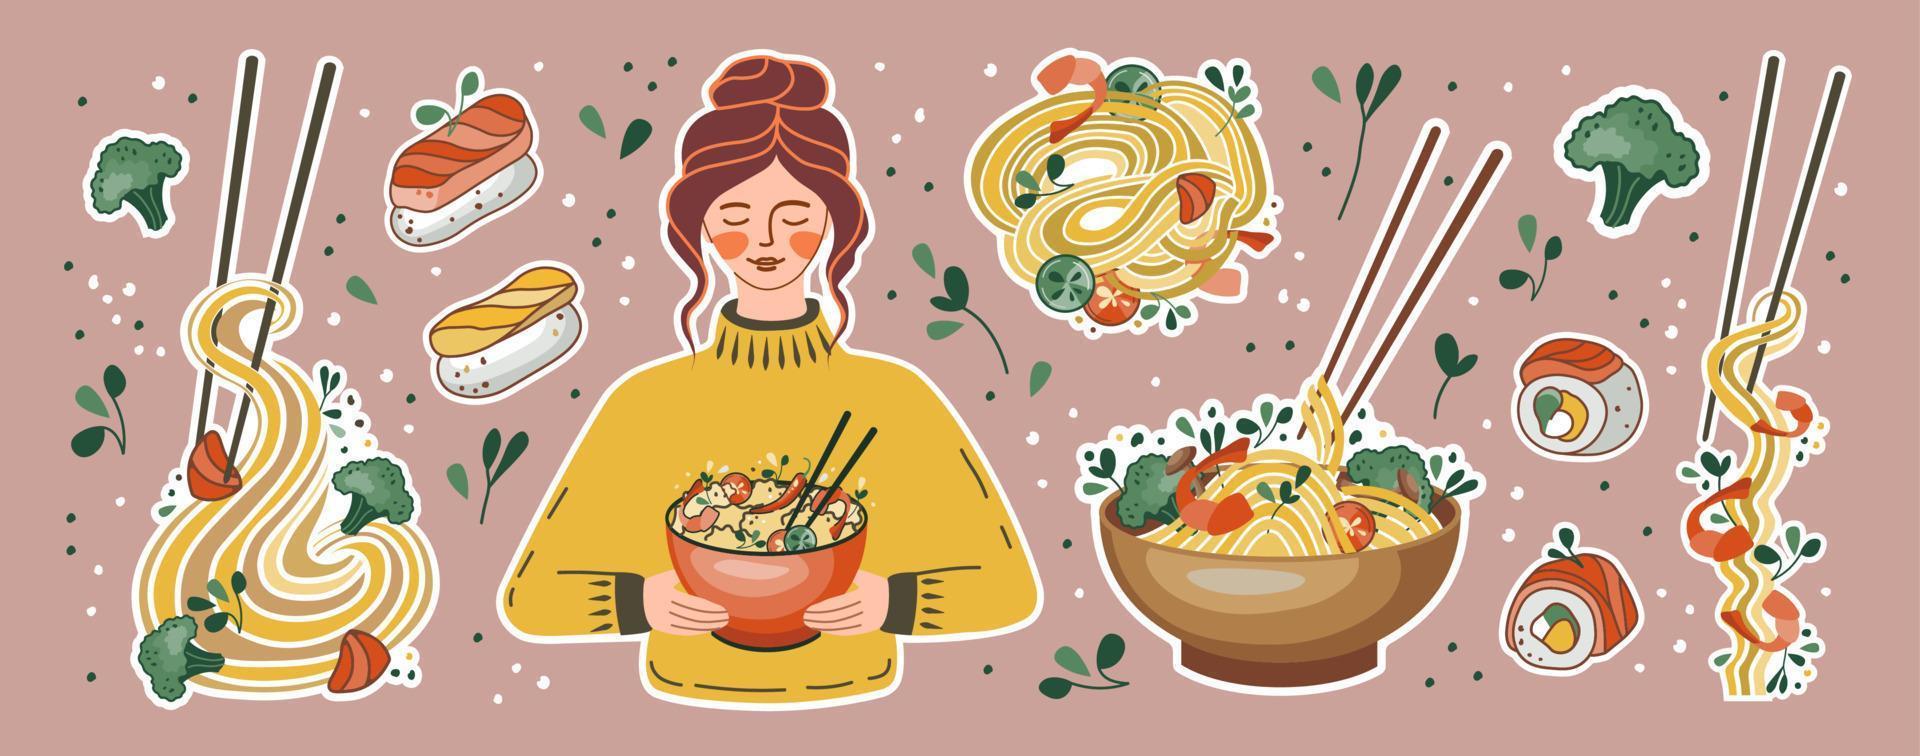 Asian food stickers. Girl with rice bowl. Udon or ramen soup, noodles, sushi, and bowl. Suitable for restaurant banners, logos, and fast food advertisements. Seafood. vector